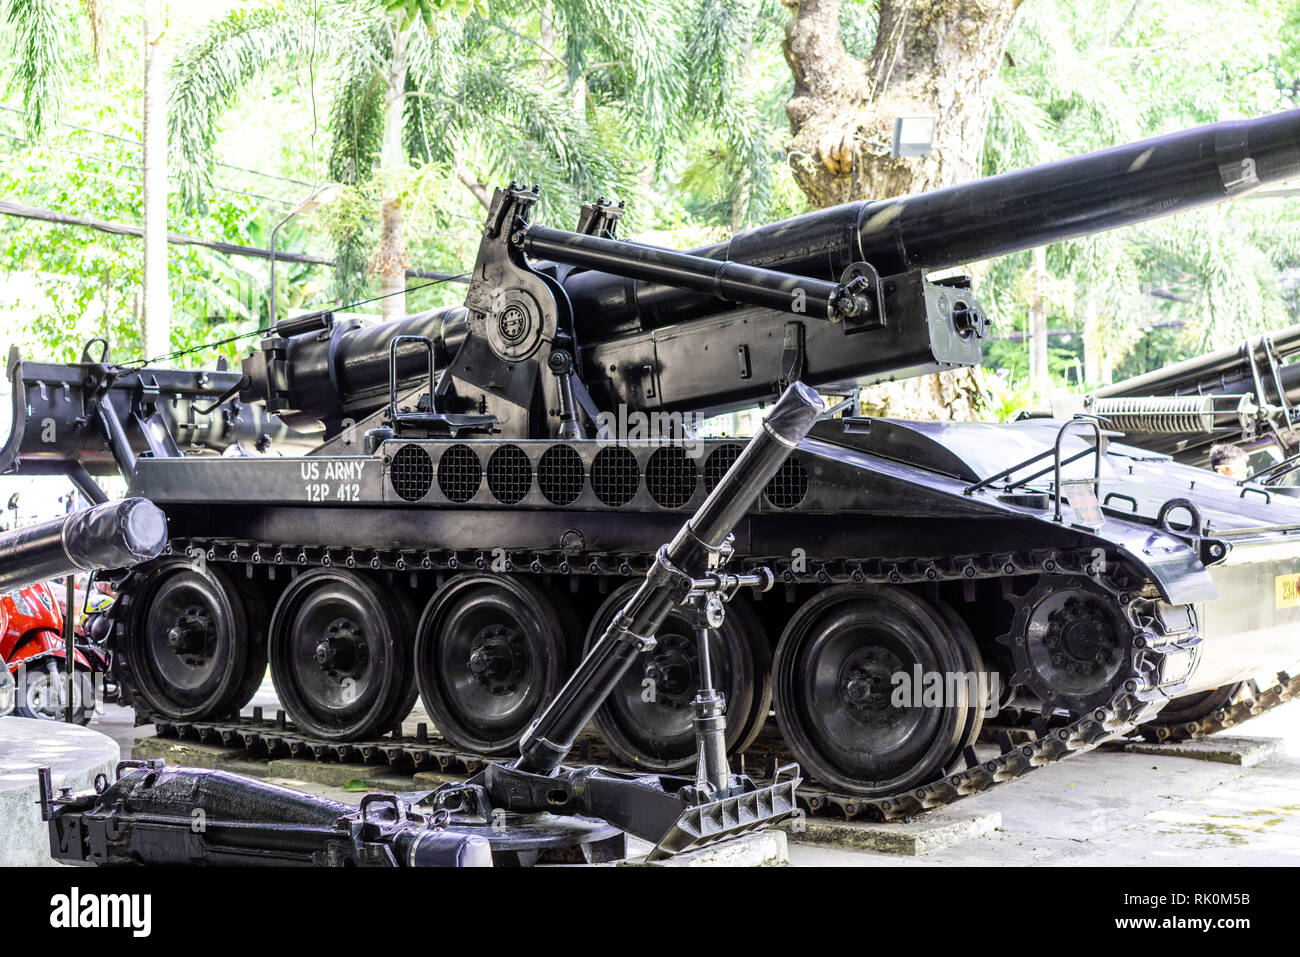 HO CHI MINH CITY, VIETNAM - JANUARY 25, 2019: War Remnants Museum. US AIR FORCE near Saigon Remnants Museum captured during the war, the most popular  Stock Photo